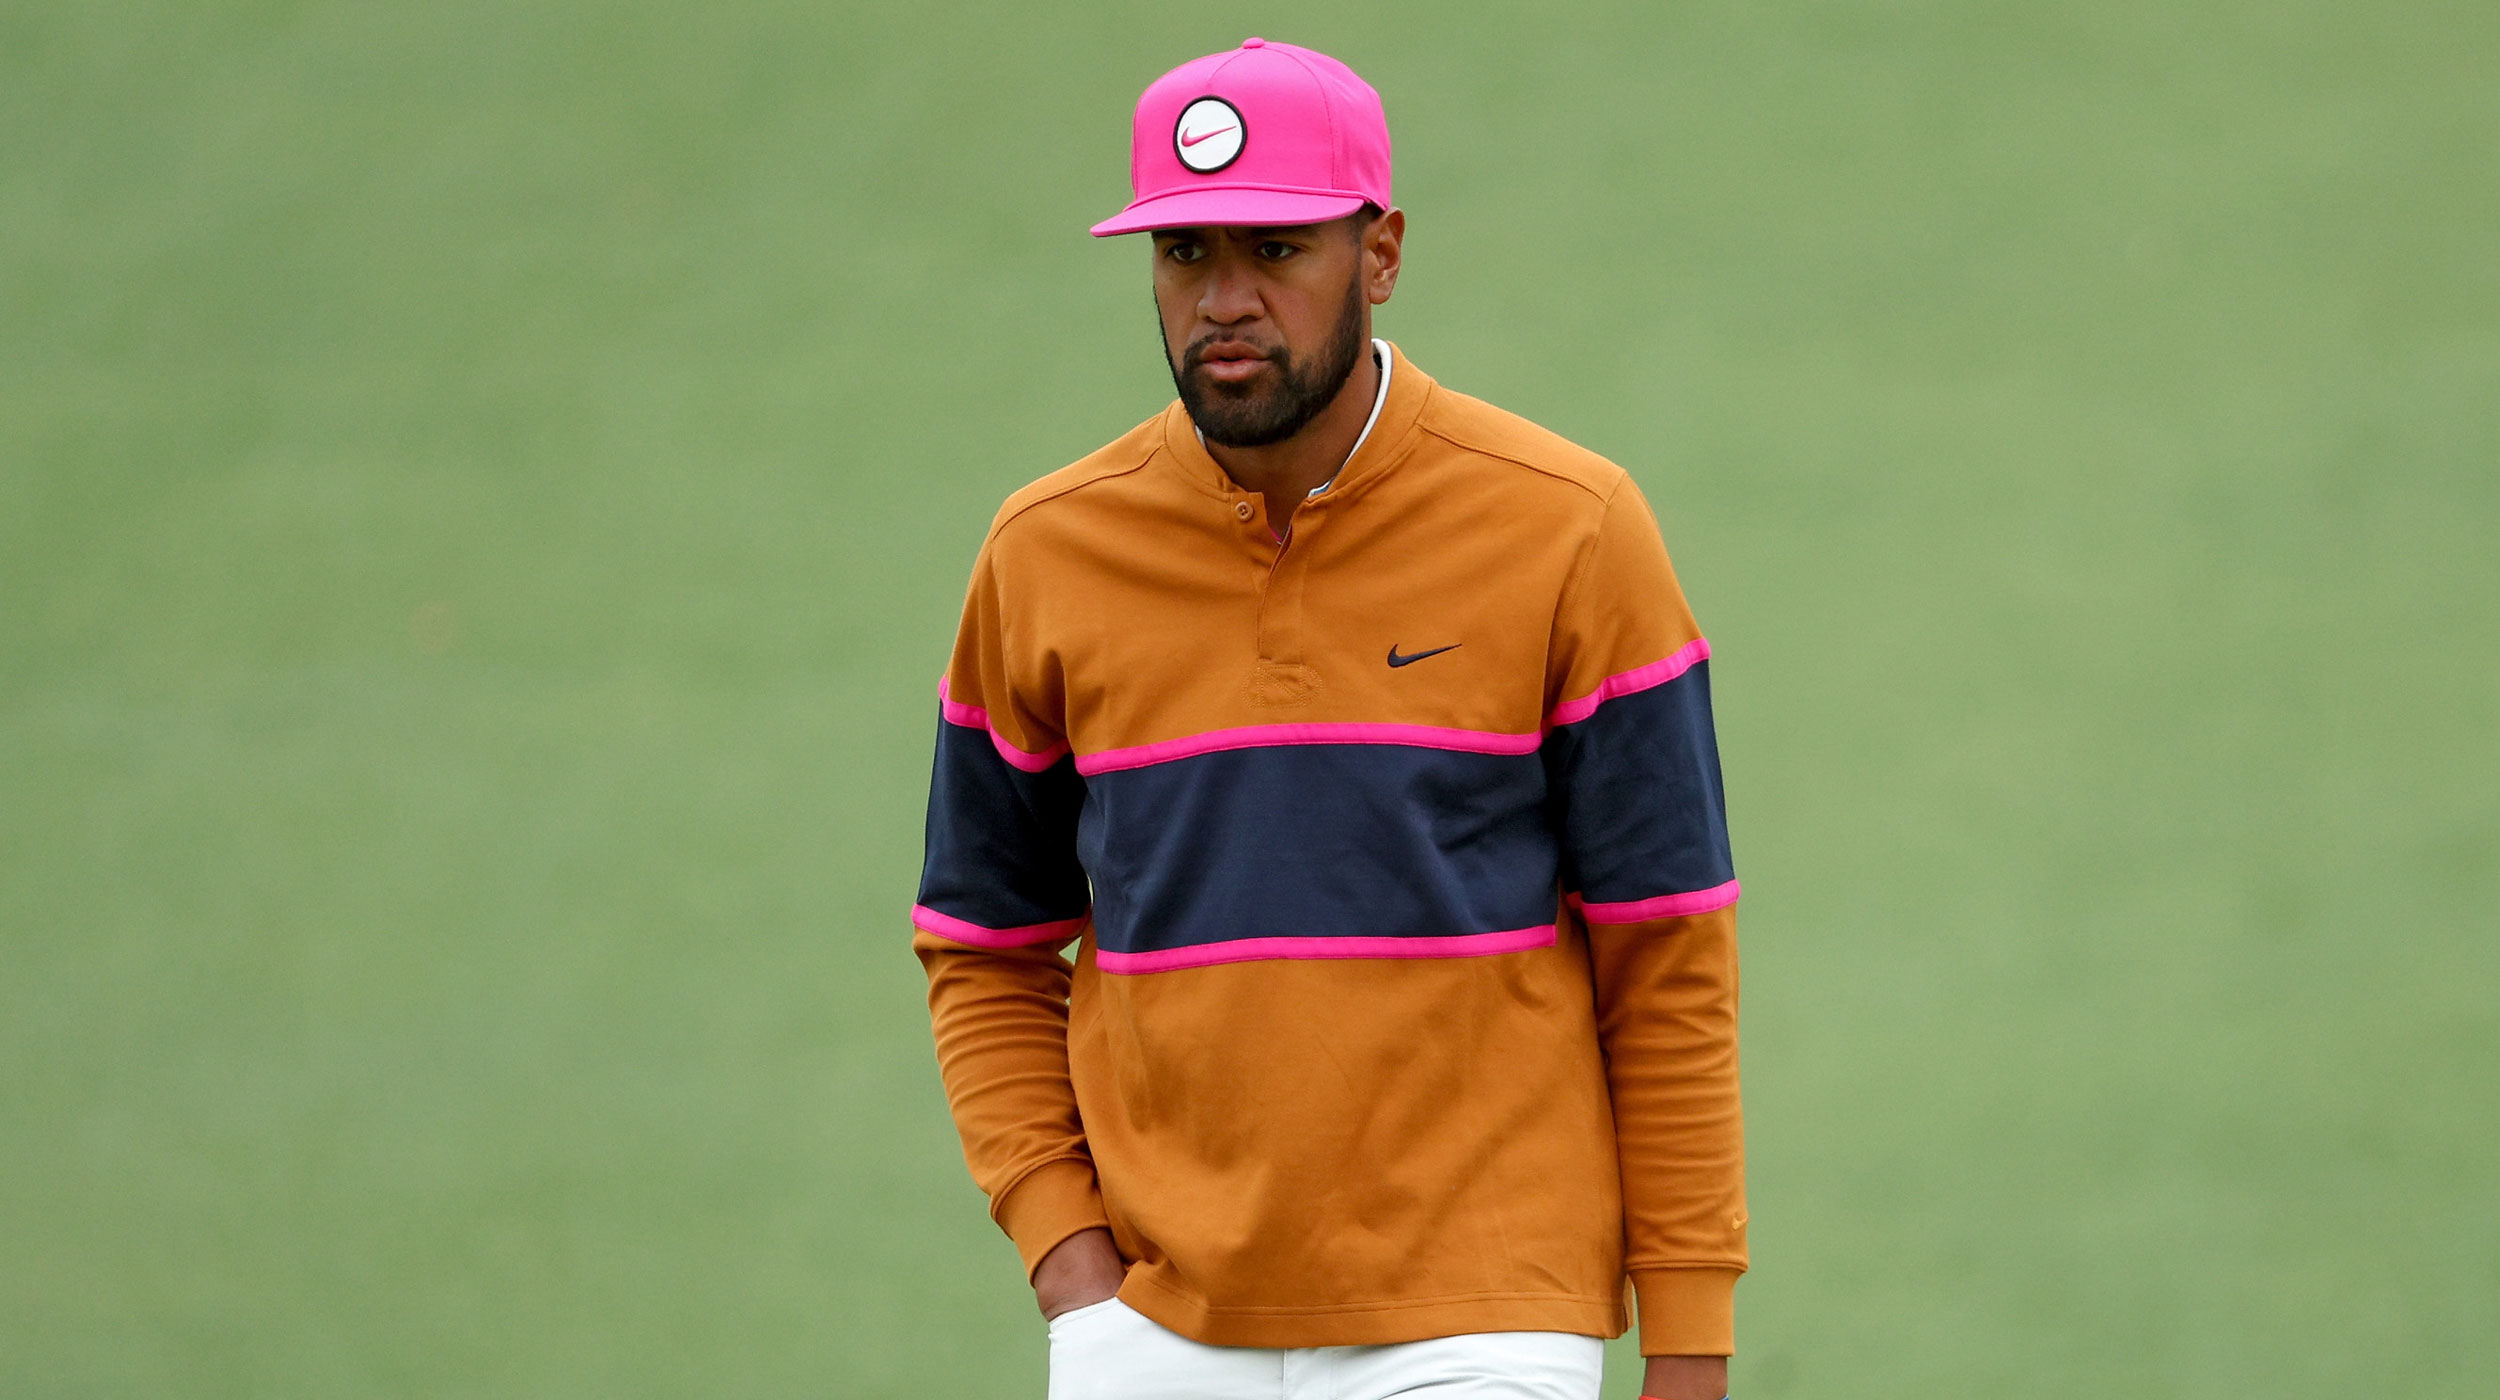 What Is Tony Finau Wearing? - Check out his Nike gear | Golf Monthly